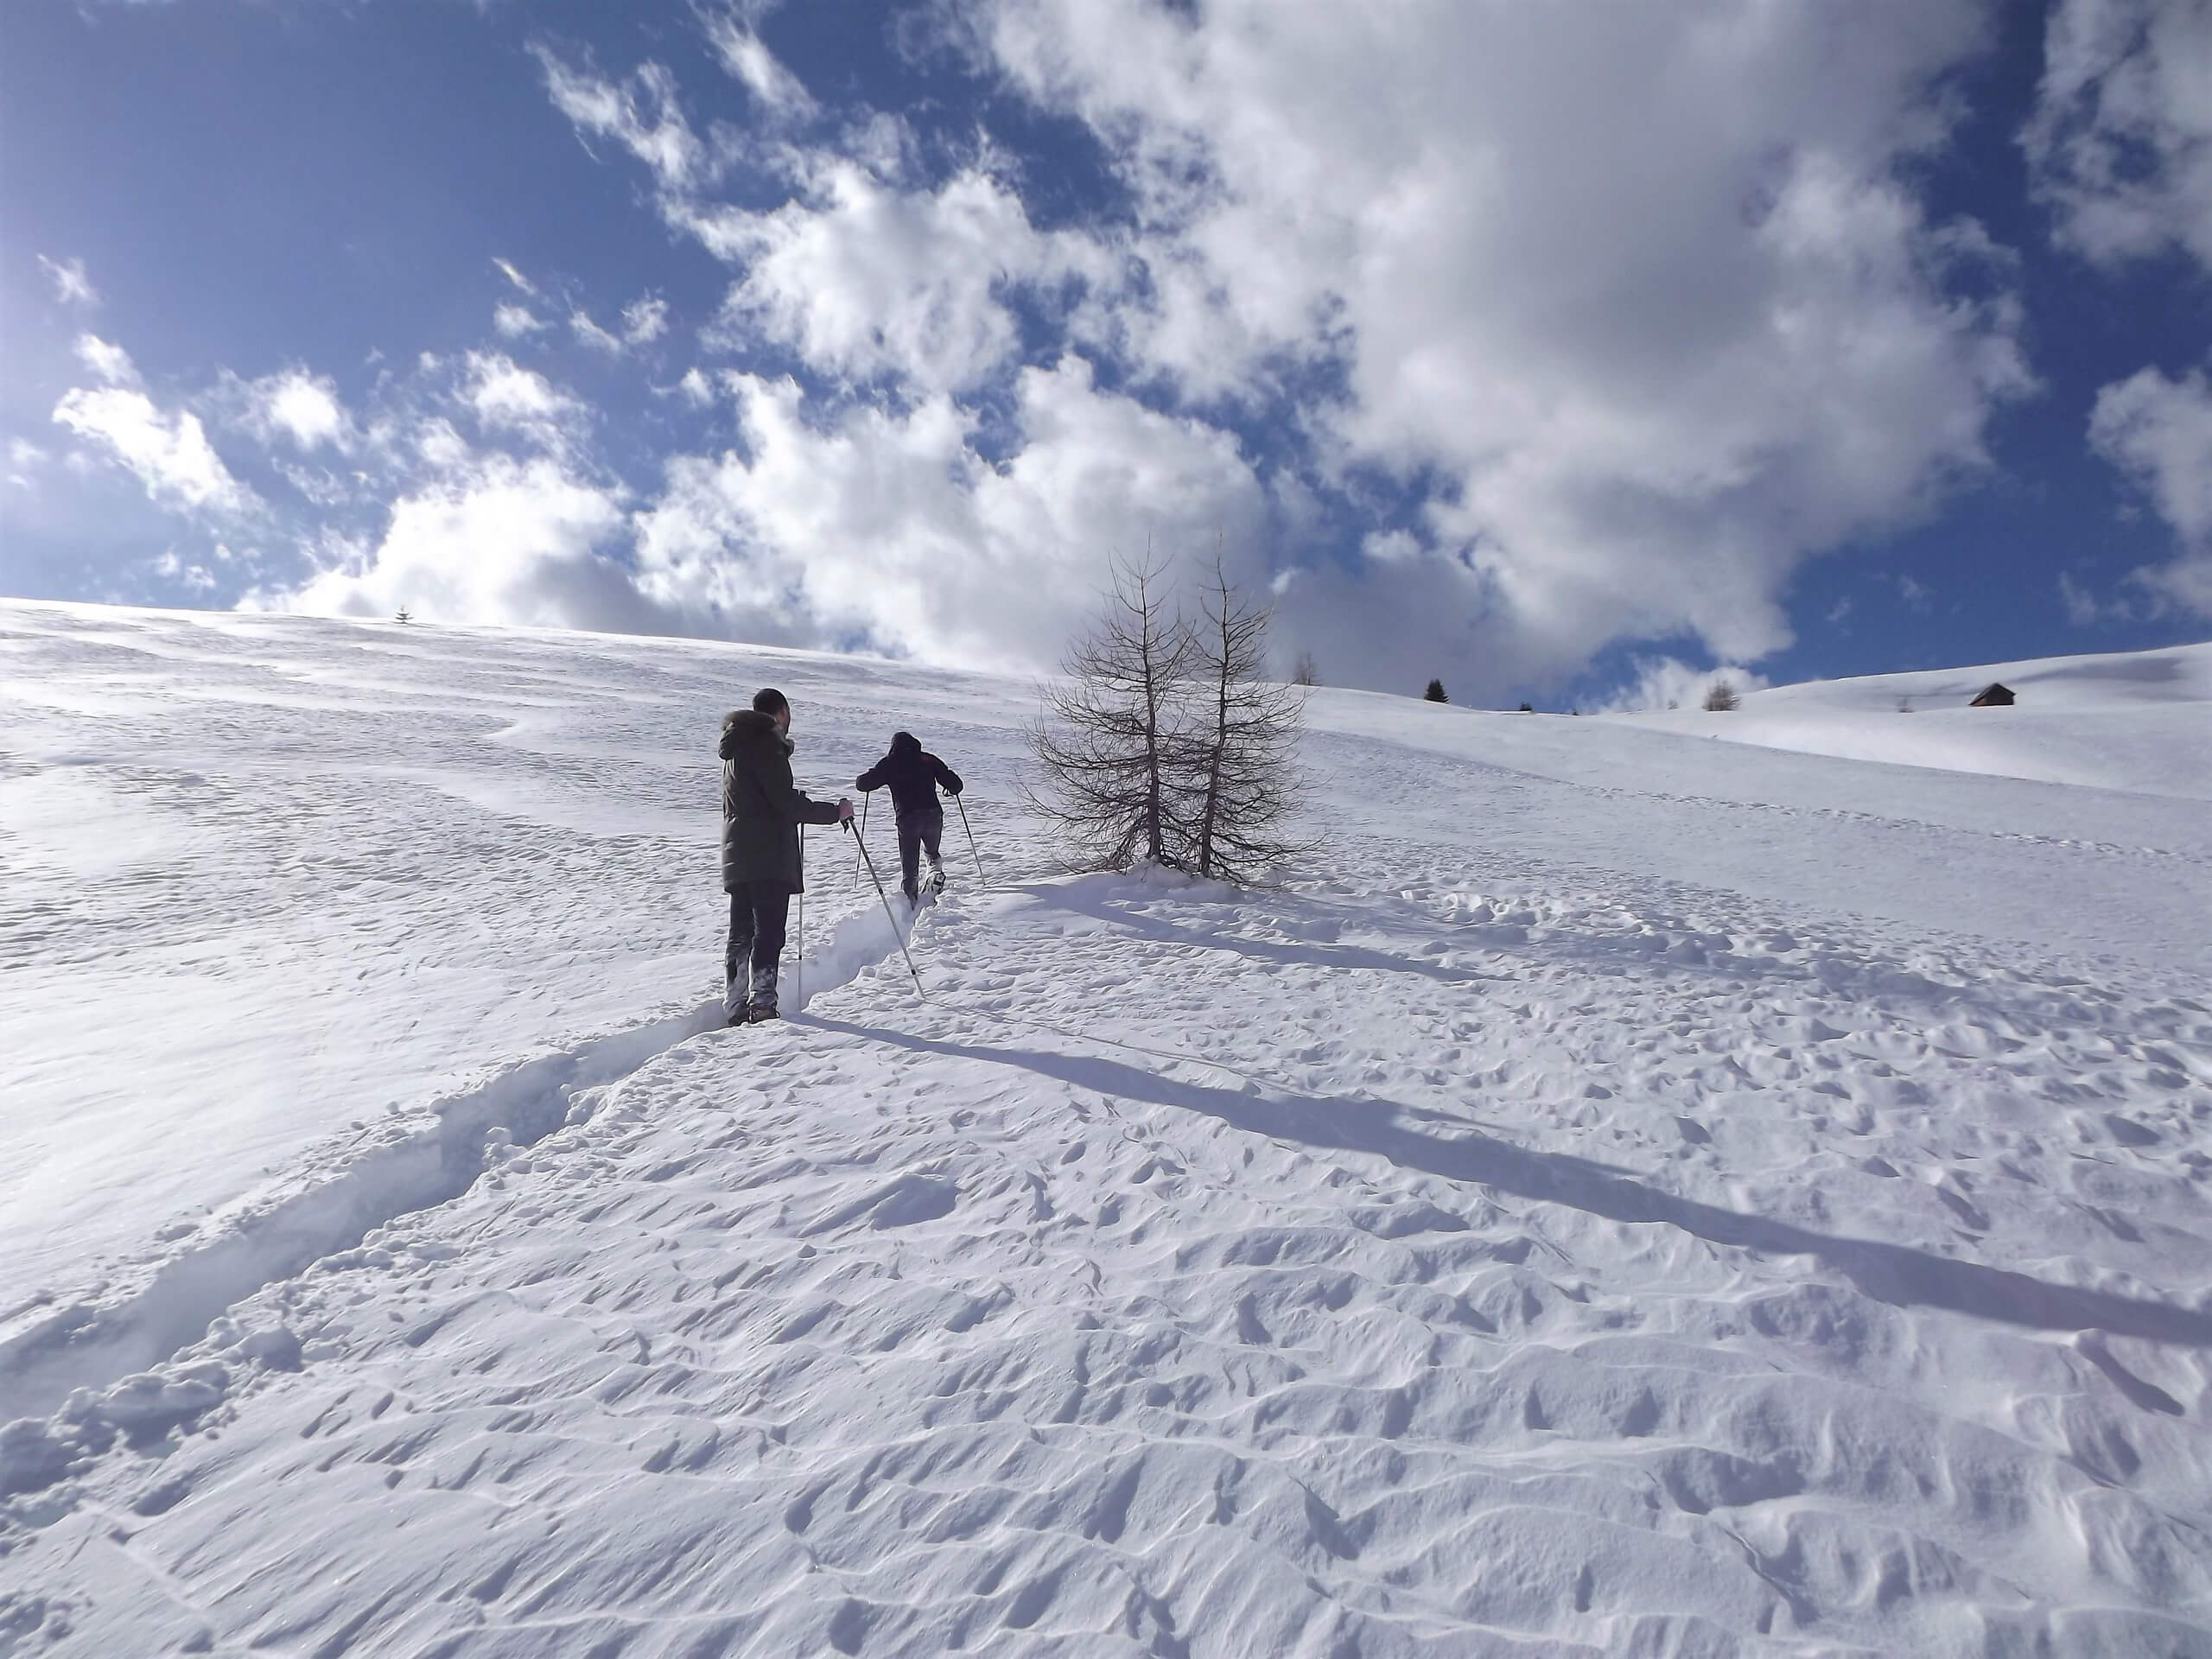 Two snowshoers ascending to the snowy mountain in Italy